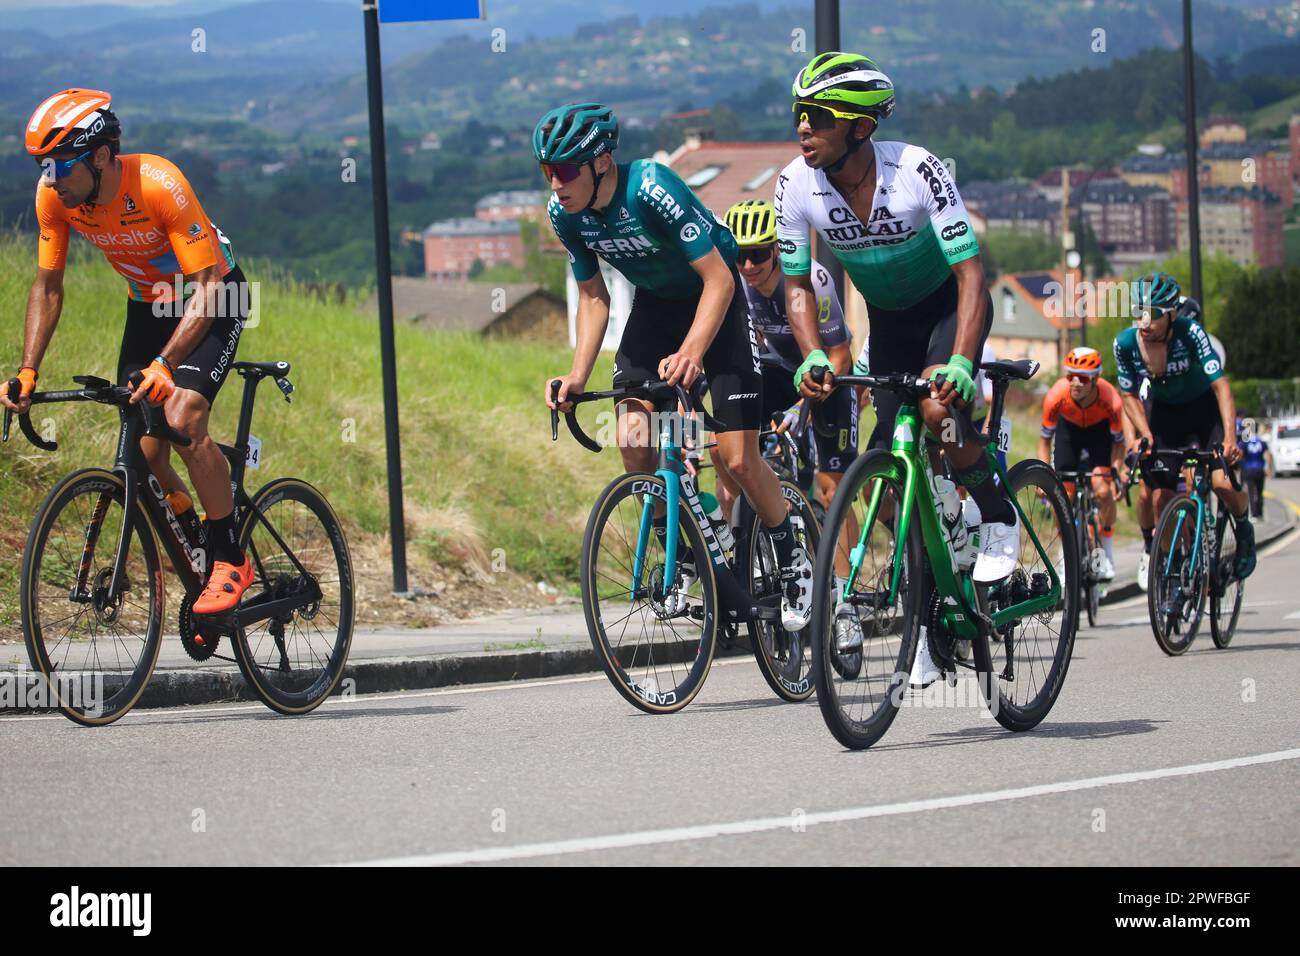 Oviedo, Spain, 30th April, 2023: The escape led by Luis Angel Mate (Euskaltel - Euskadi, L), Jon Agirre (Kern Pharma Team) and Mulu Kinfe Hailemichael (Caja Rural - Seguros RGA, R) during the 3rd stage of the Vuelta a Asturias 2023 between Cangas del Narcea and Oviedo, on April 30, 2023, in Oviedo, Spain. Credit: Alberto Brevers / Alamy Live News Stock Photo